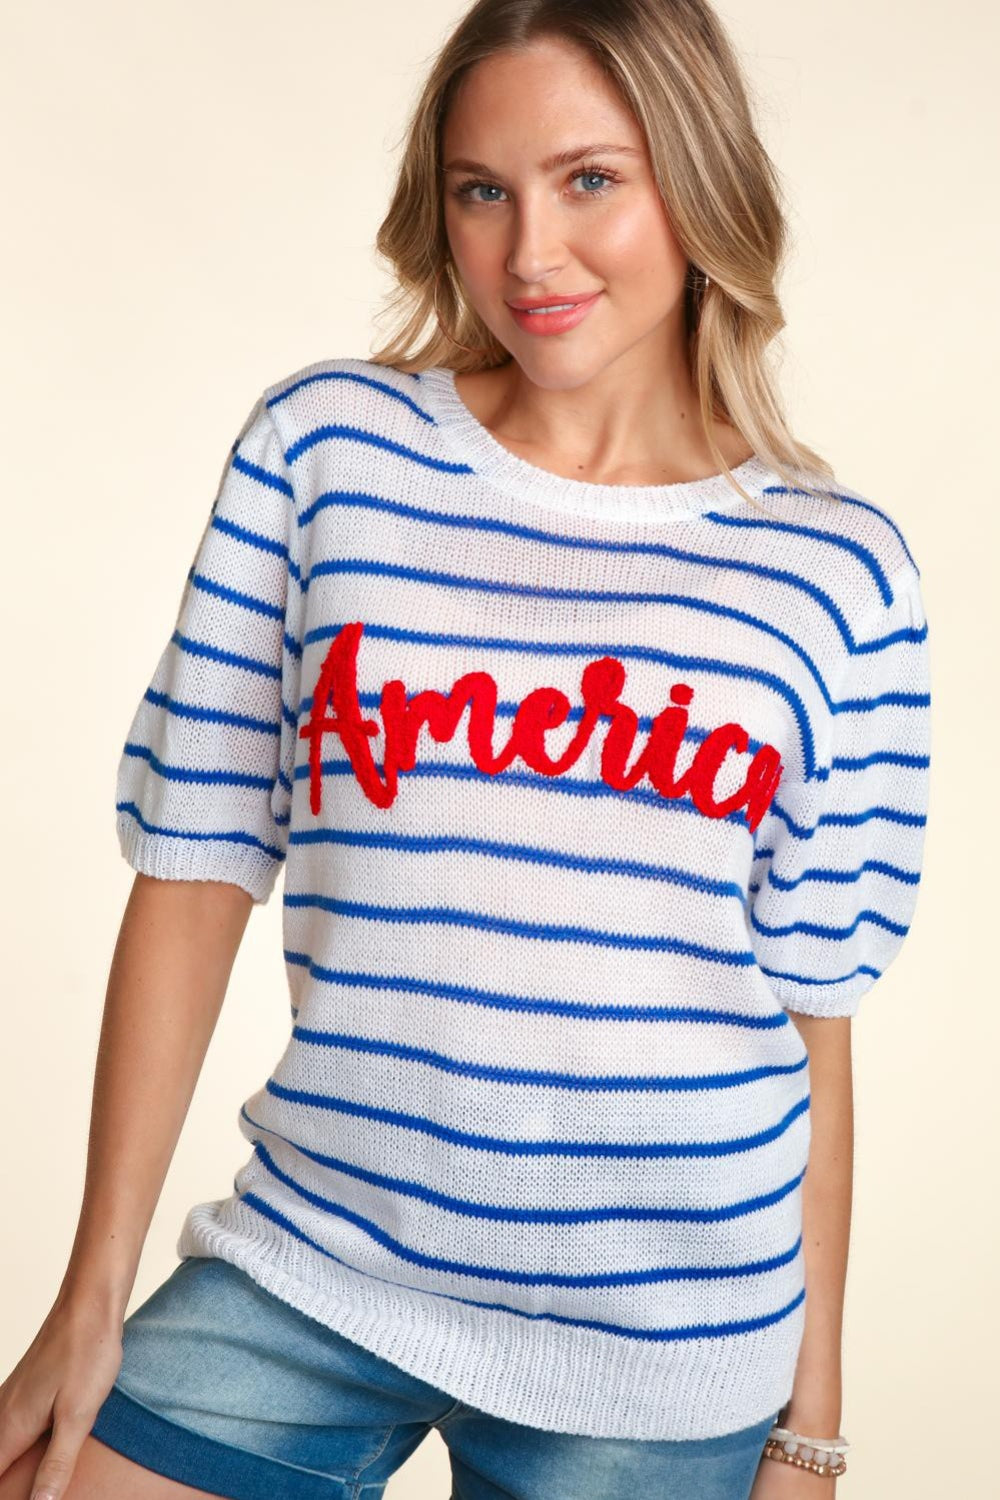 Haptics Letter Embroidery Striped Knit Top Sunset and Swim Ivory/Blue/Red S 